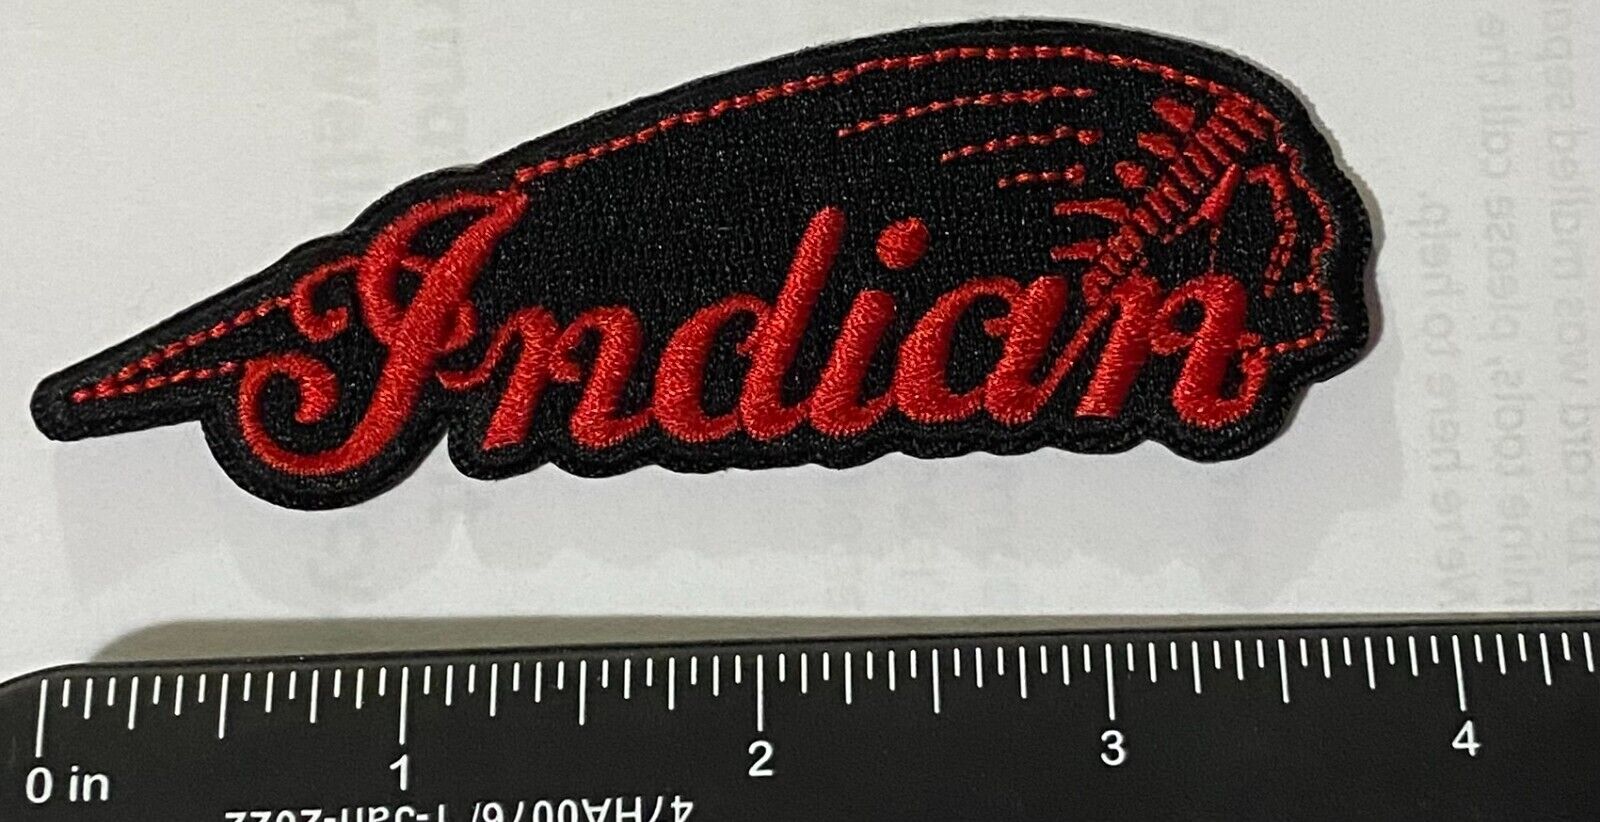 INDIAN MOTORCYCLE INDIAN HEAD DRESS IRON-ON BIKER PATCH